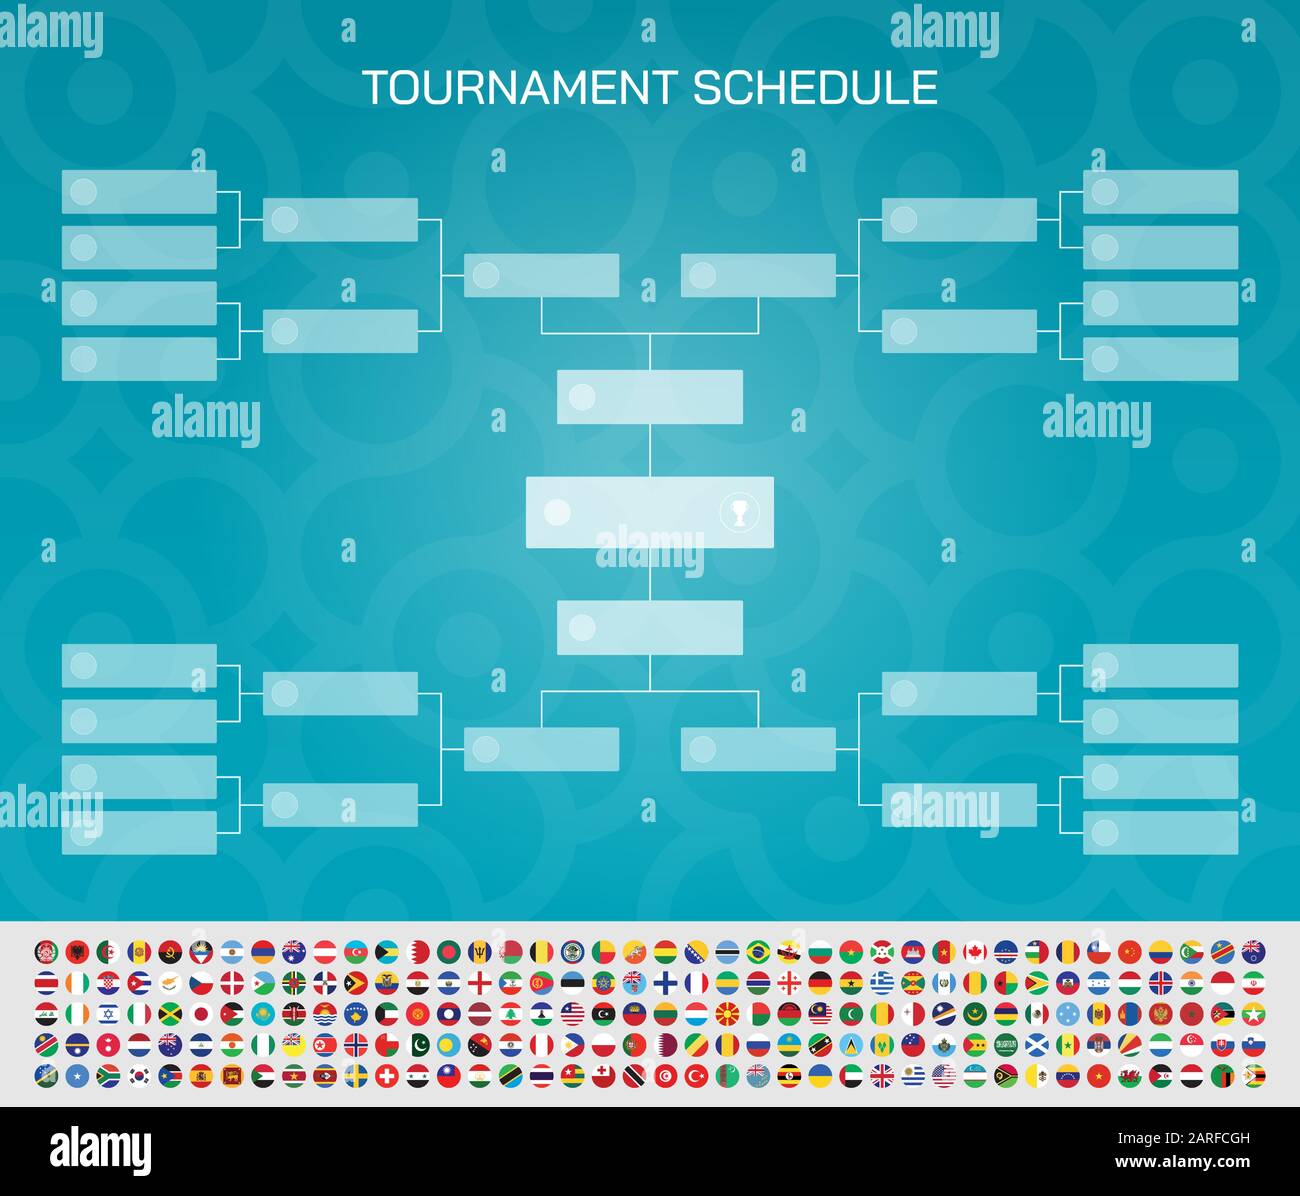 Example of a soccer tournament configuration. On the left, the group